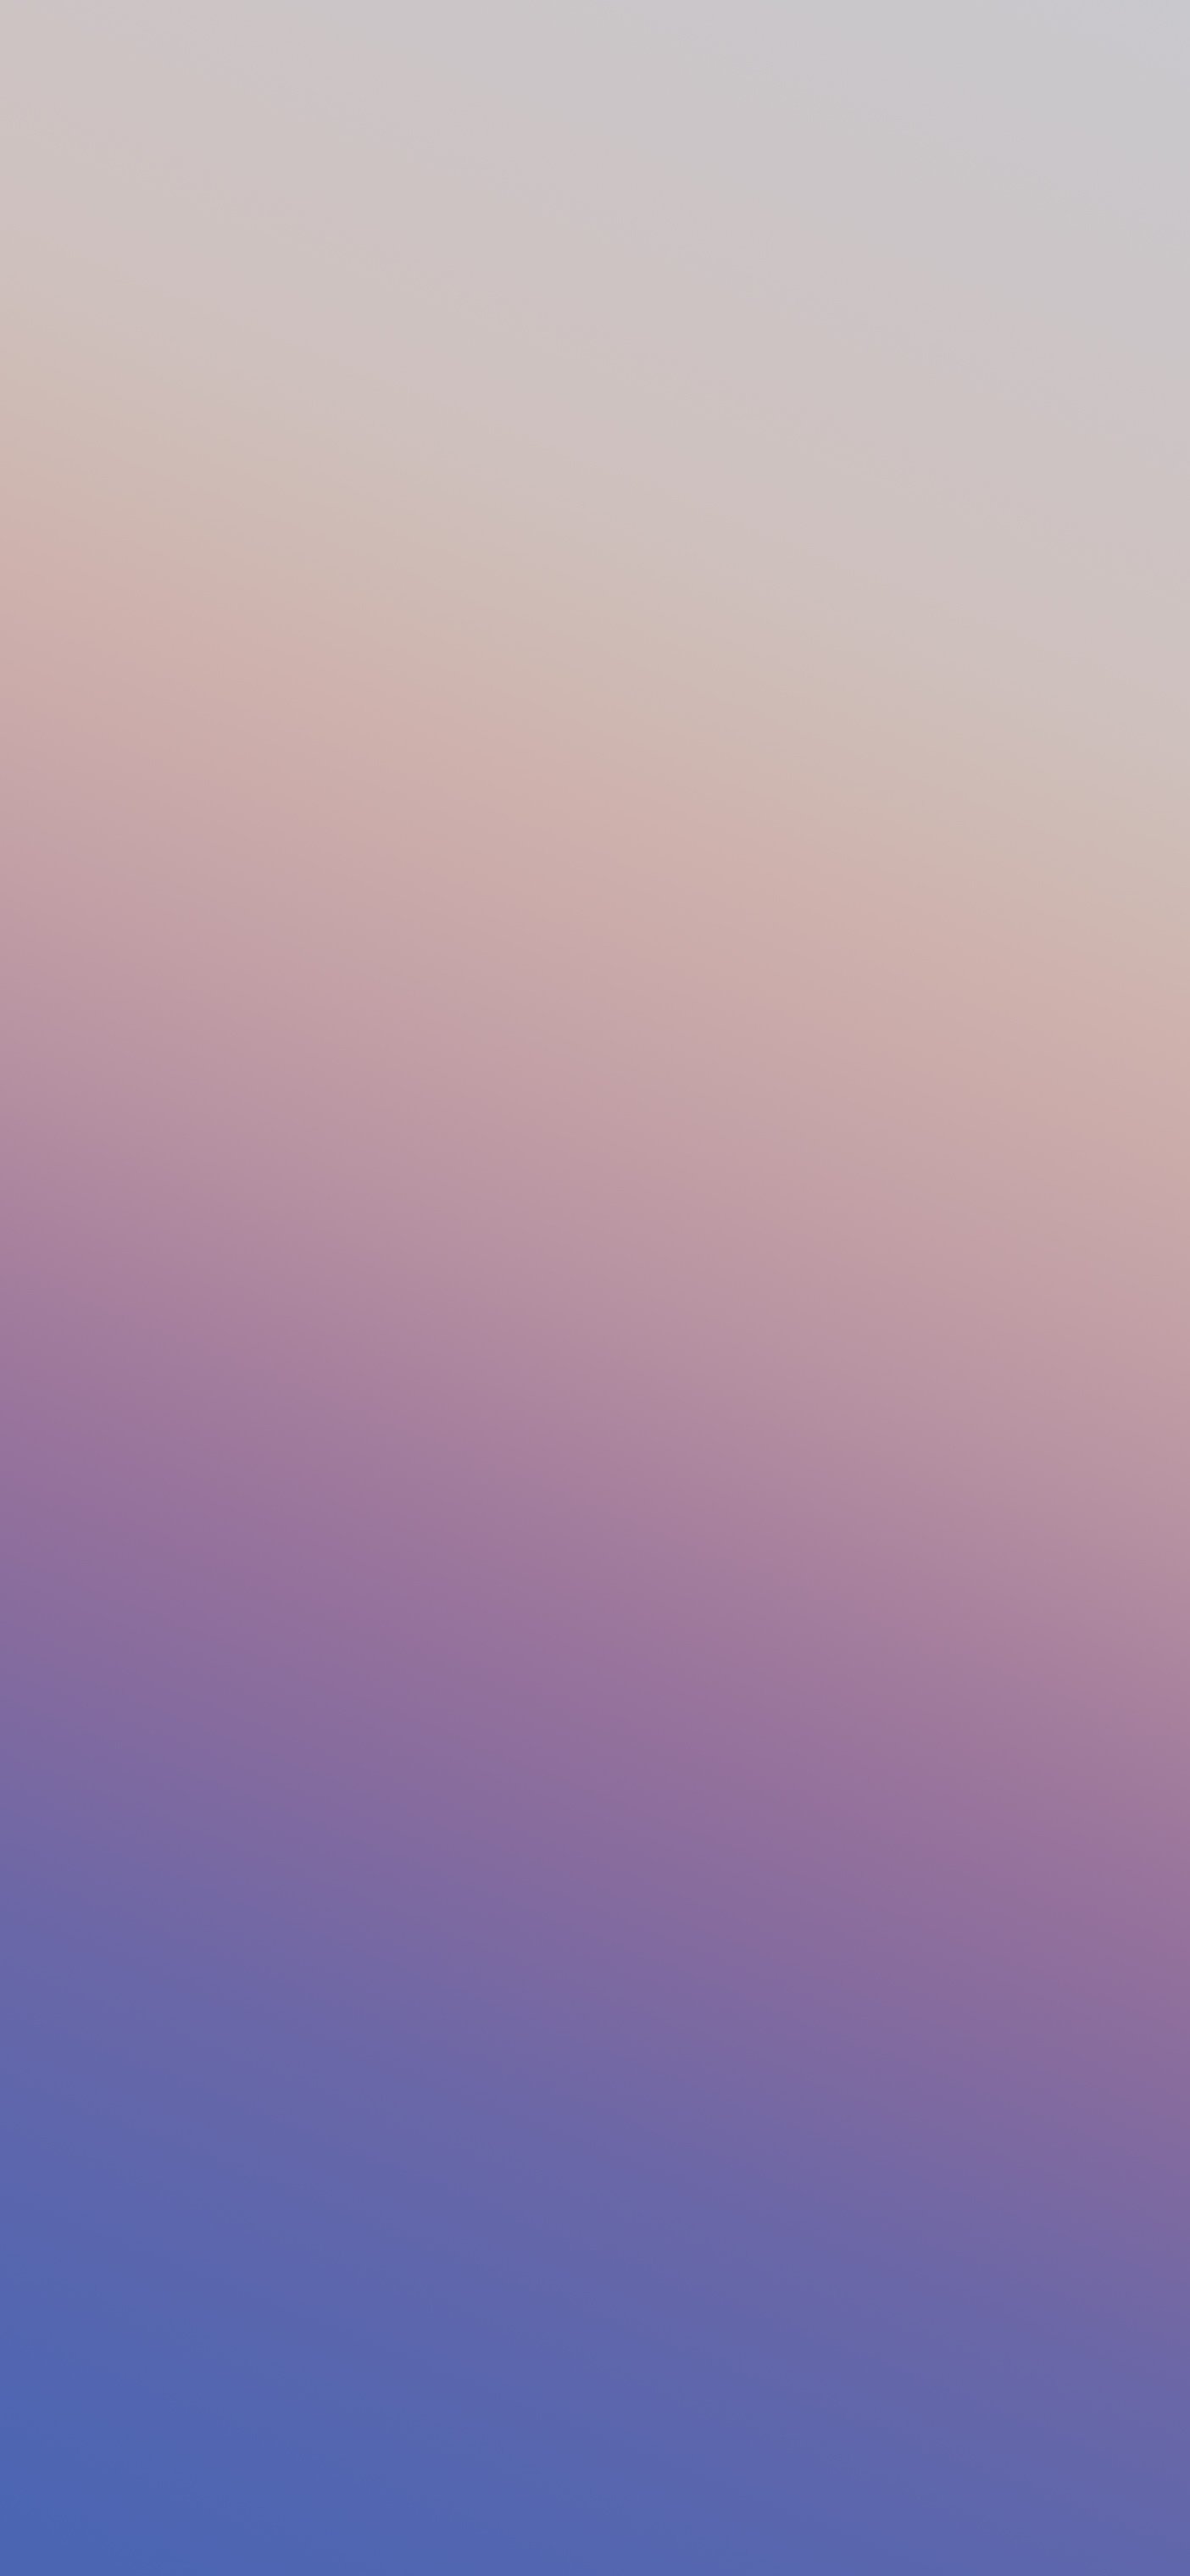 Gradient iPhone Wallpaper for your iPhone 12 Pro Max